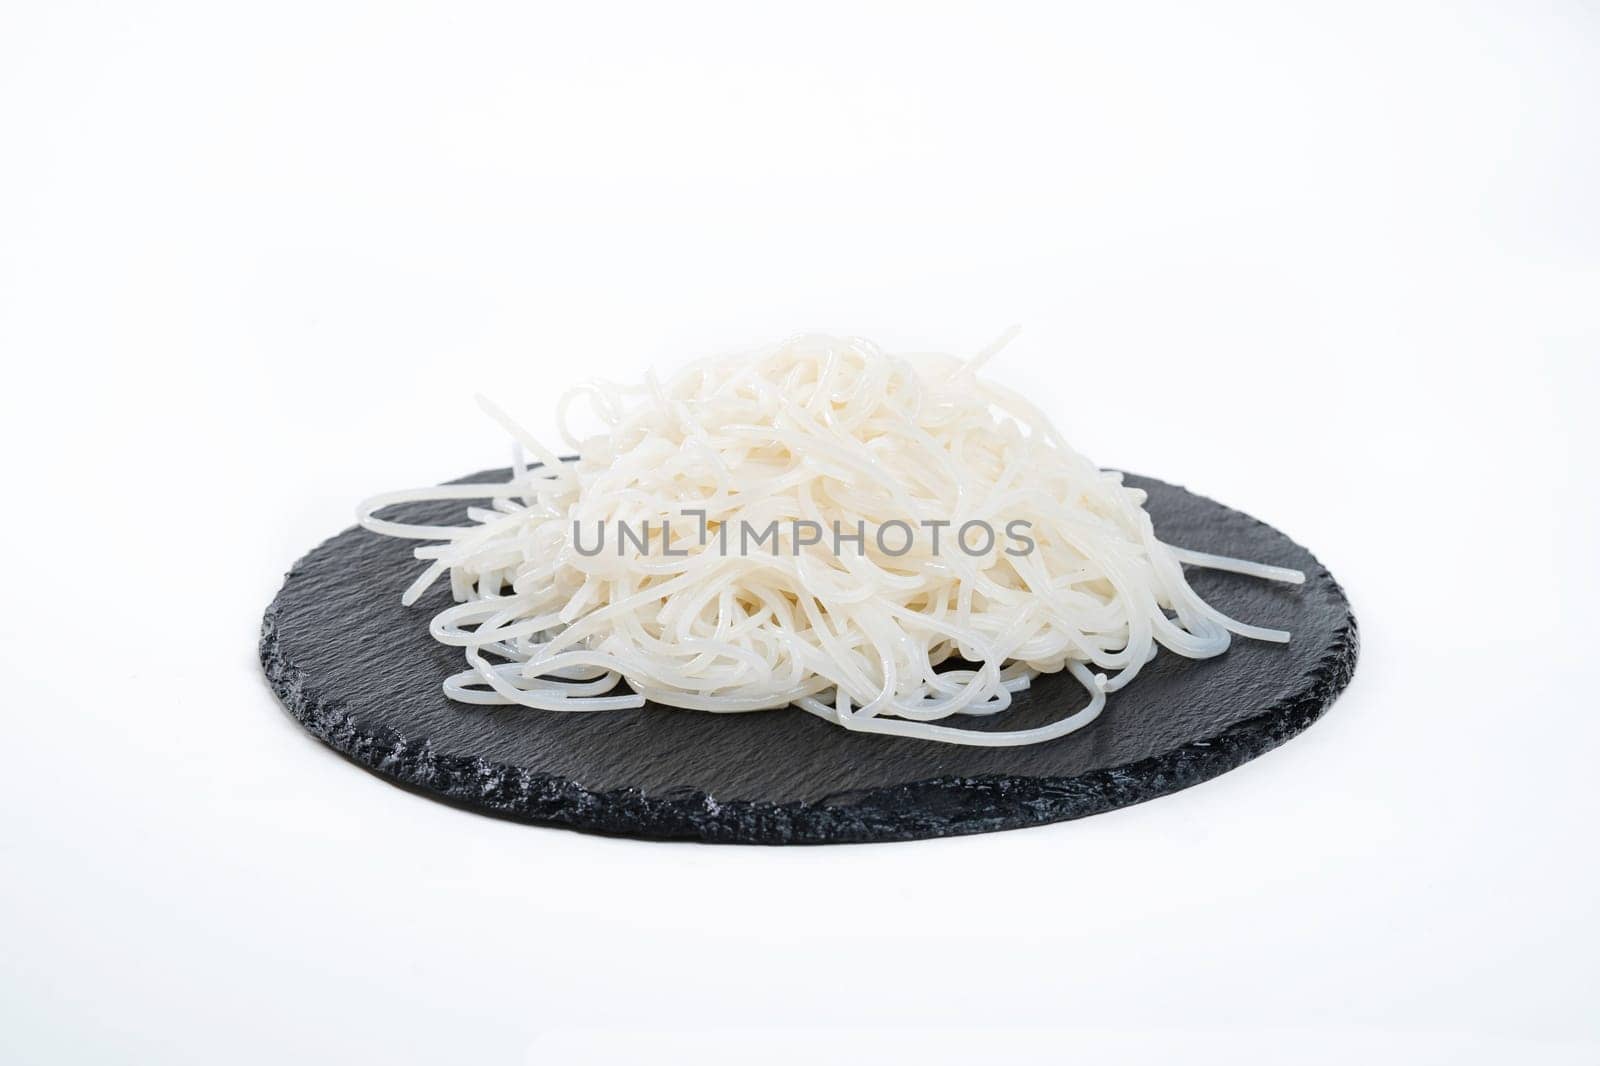 delicious rice noodles on a black plate.Garnish. View from above. Chinese cuisine, hotpot ingredient